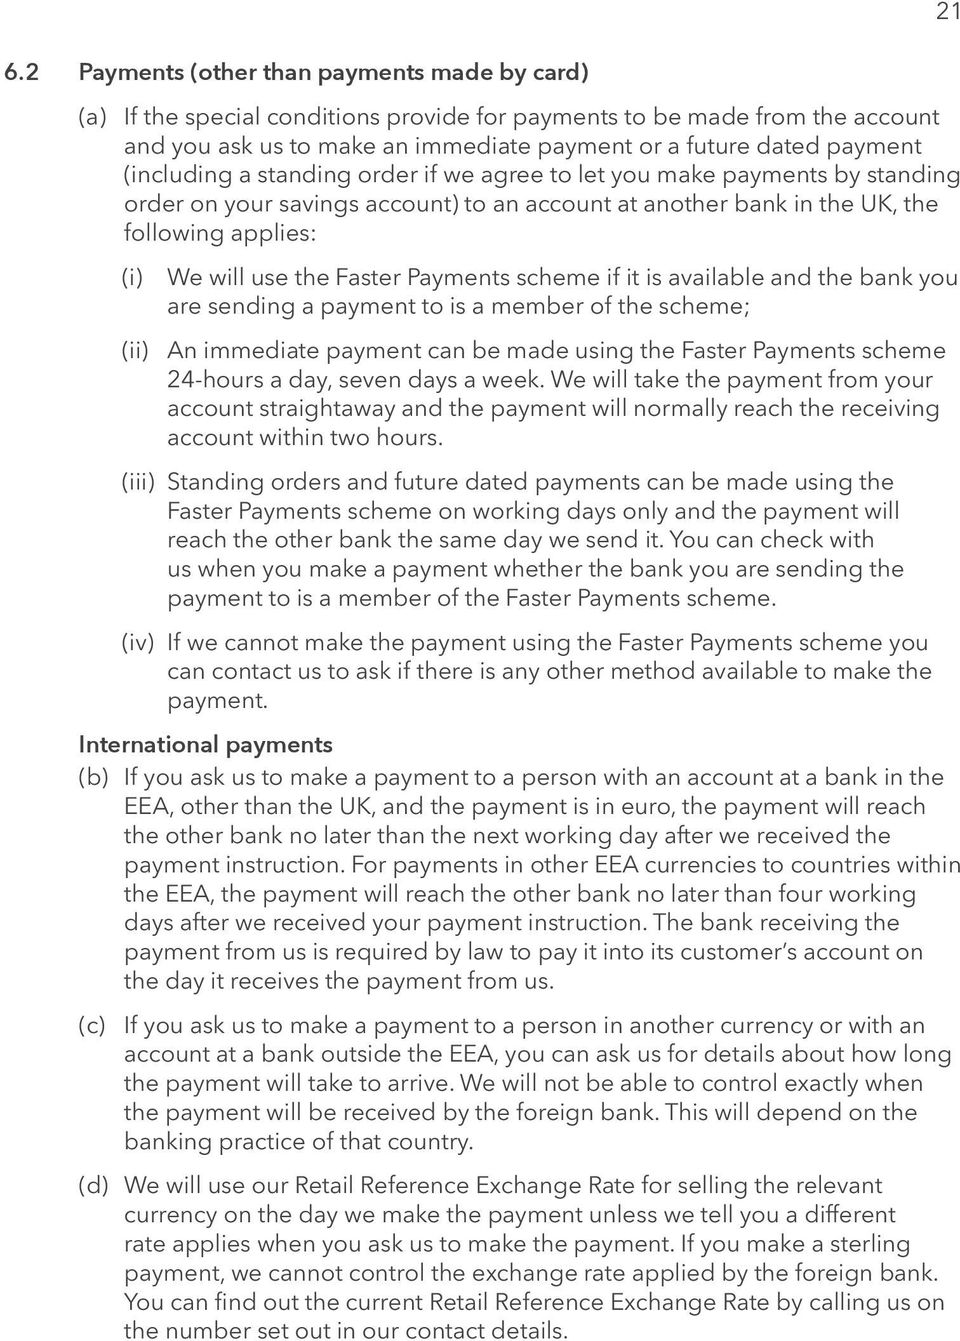 Payments scheme if it is available and the bank you are sending a payment to is a member of the scheme; (ii) An immediate payment can be made using the Faster Payments scheme 24-hours a day, seven